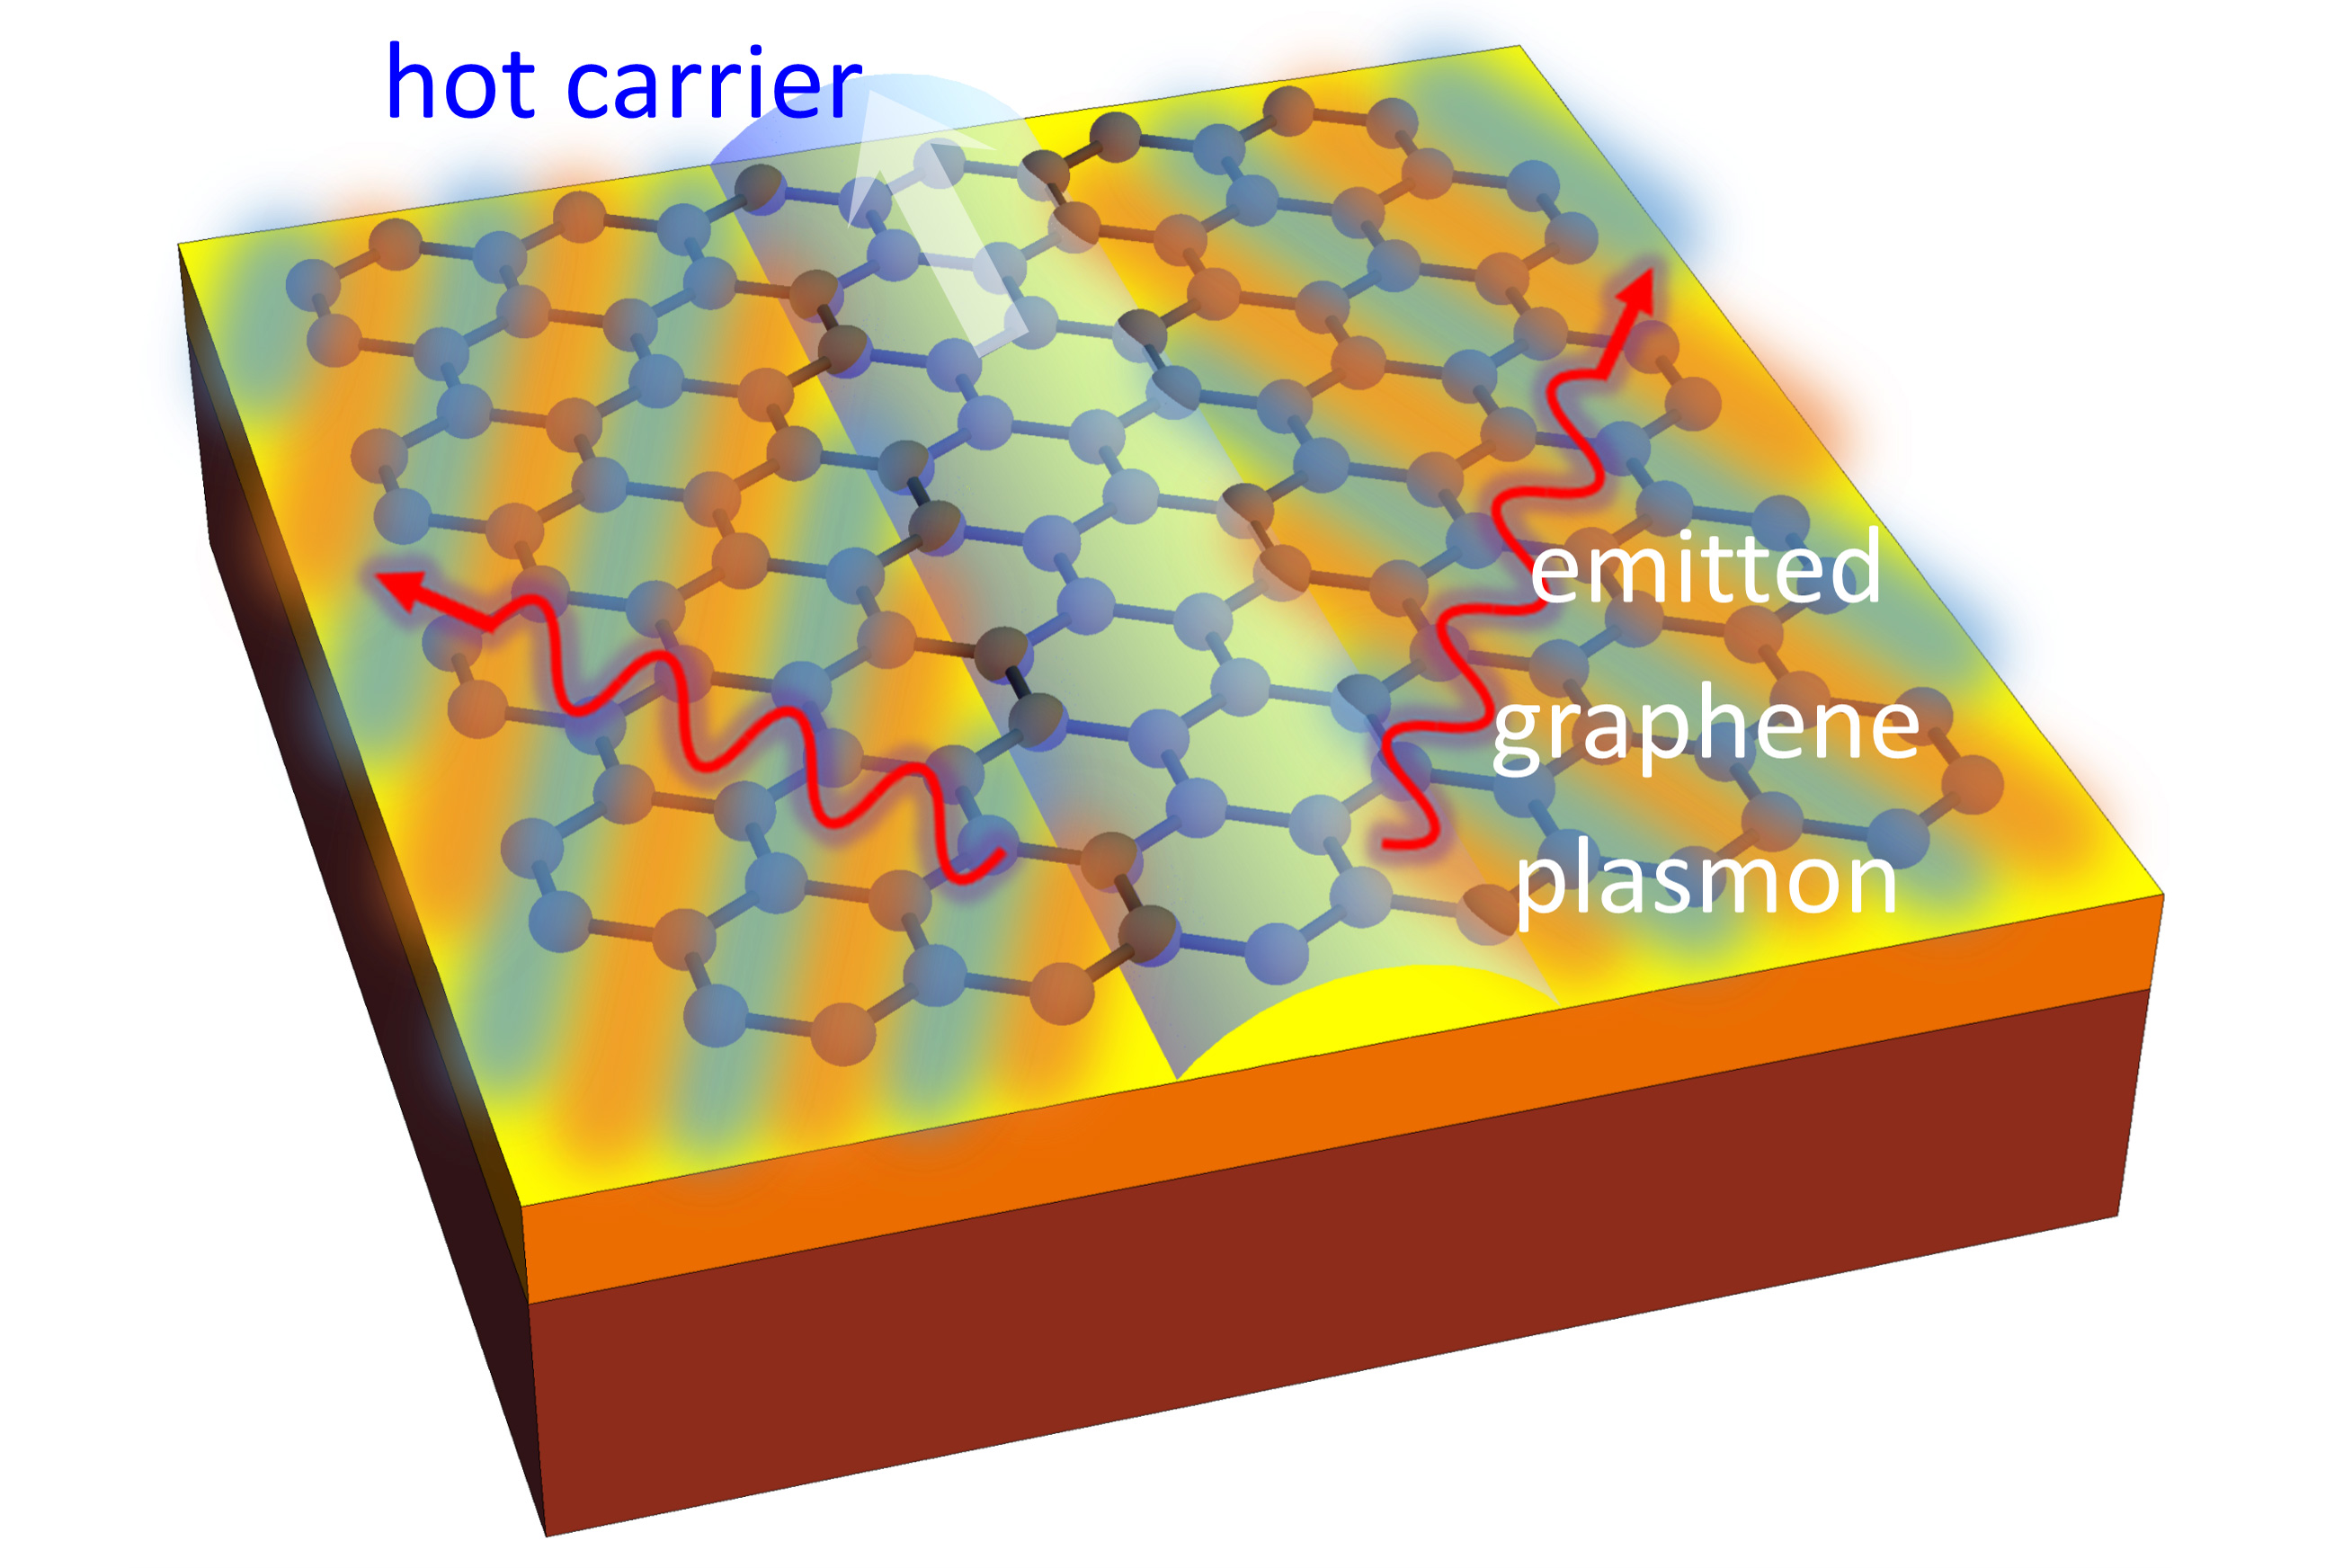 Efficient plasmonic emission by the quantum Čerenkov effect from hot carriers in graphene